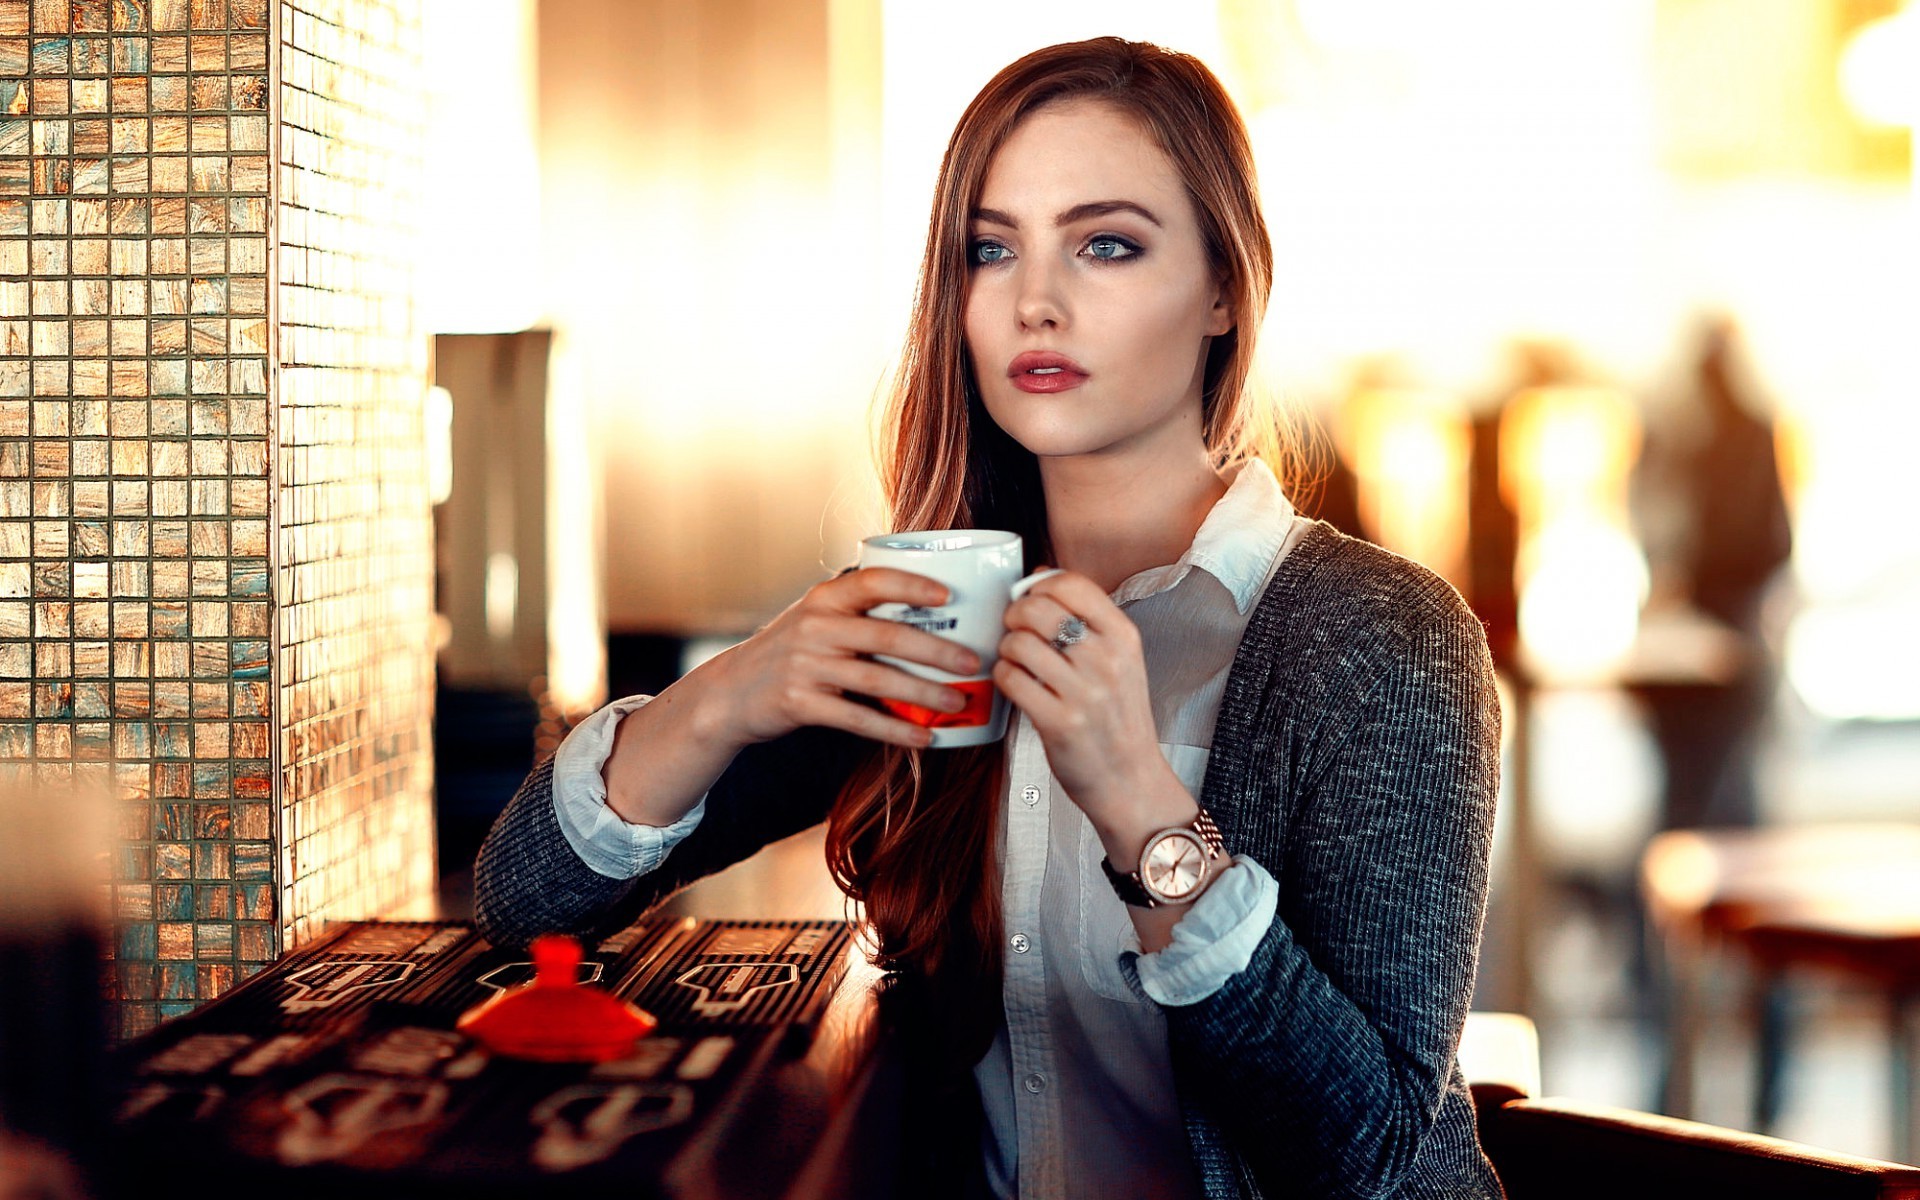 women, Model, Redhead, Long Hair, Alessandro Di Cicco, Looking Away, Blue Eyes, Open Mouth, Sitting, Cup, Blouses, Sweater, Watches, Depth Of Field, Restaurant Wallpaper